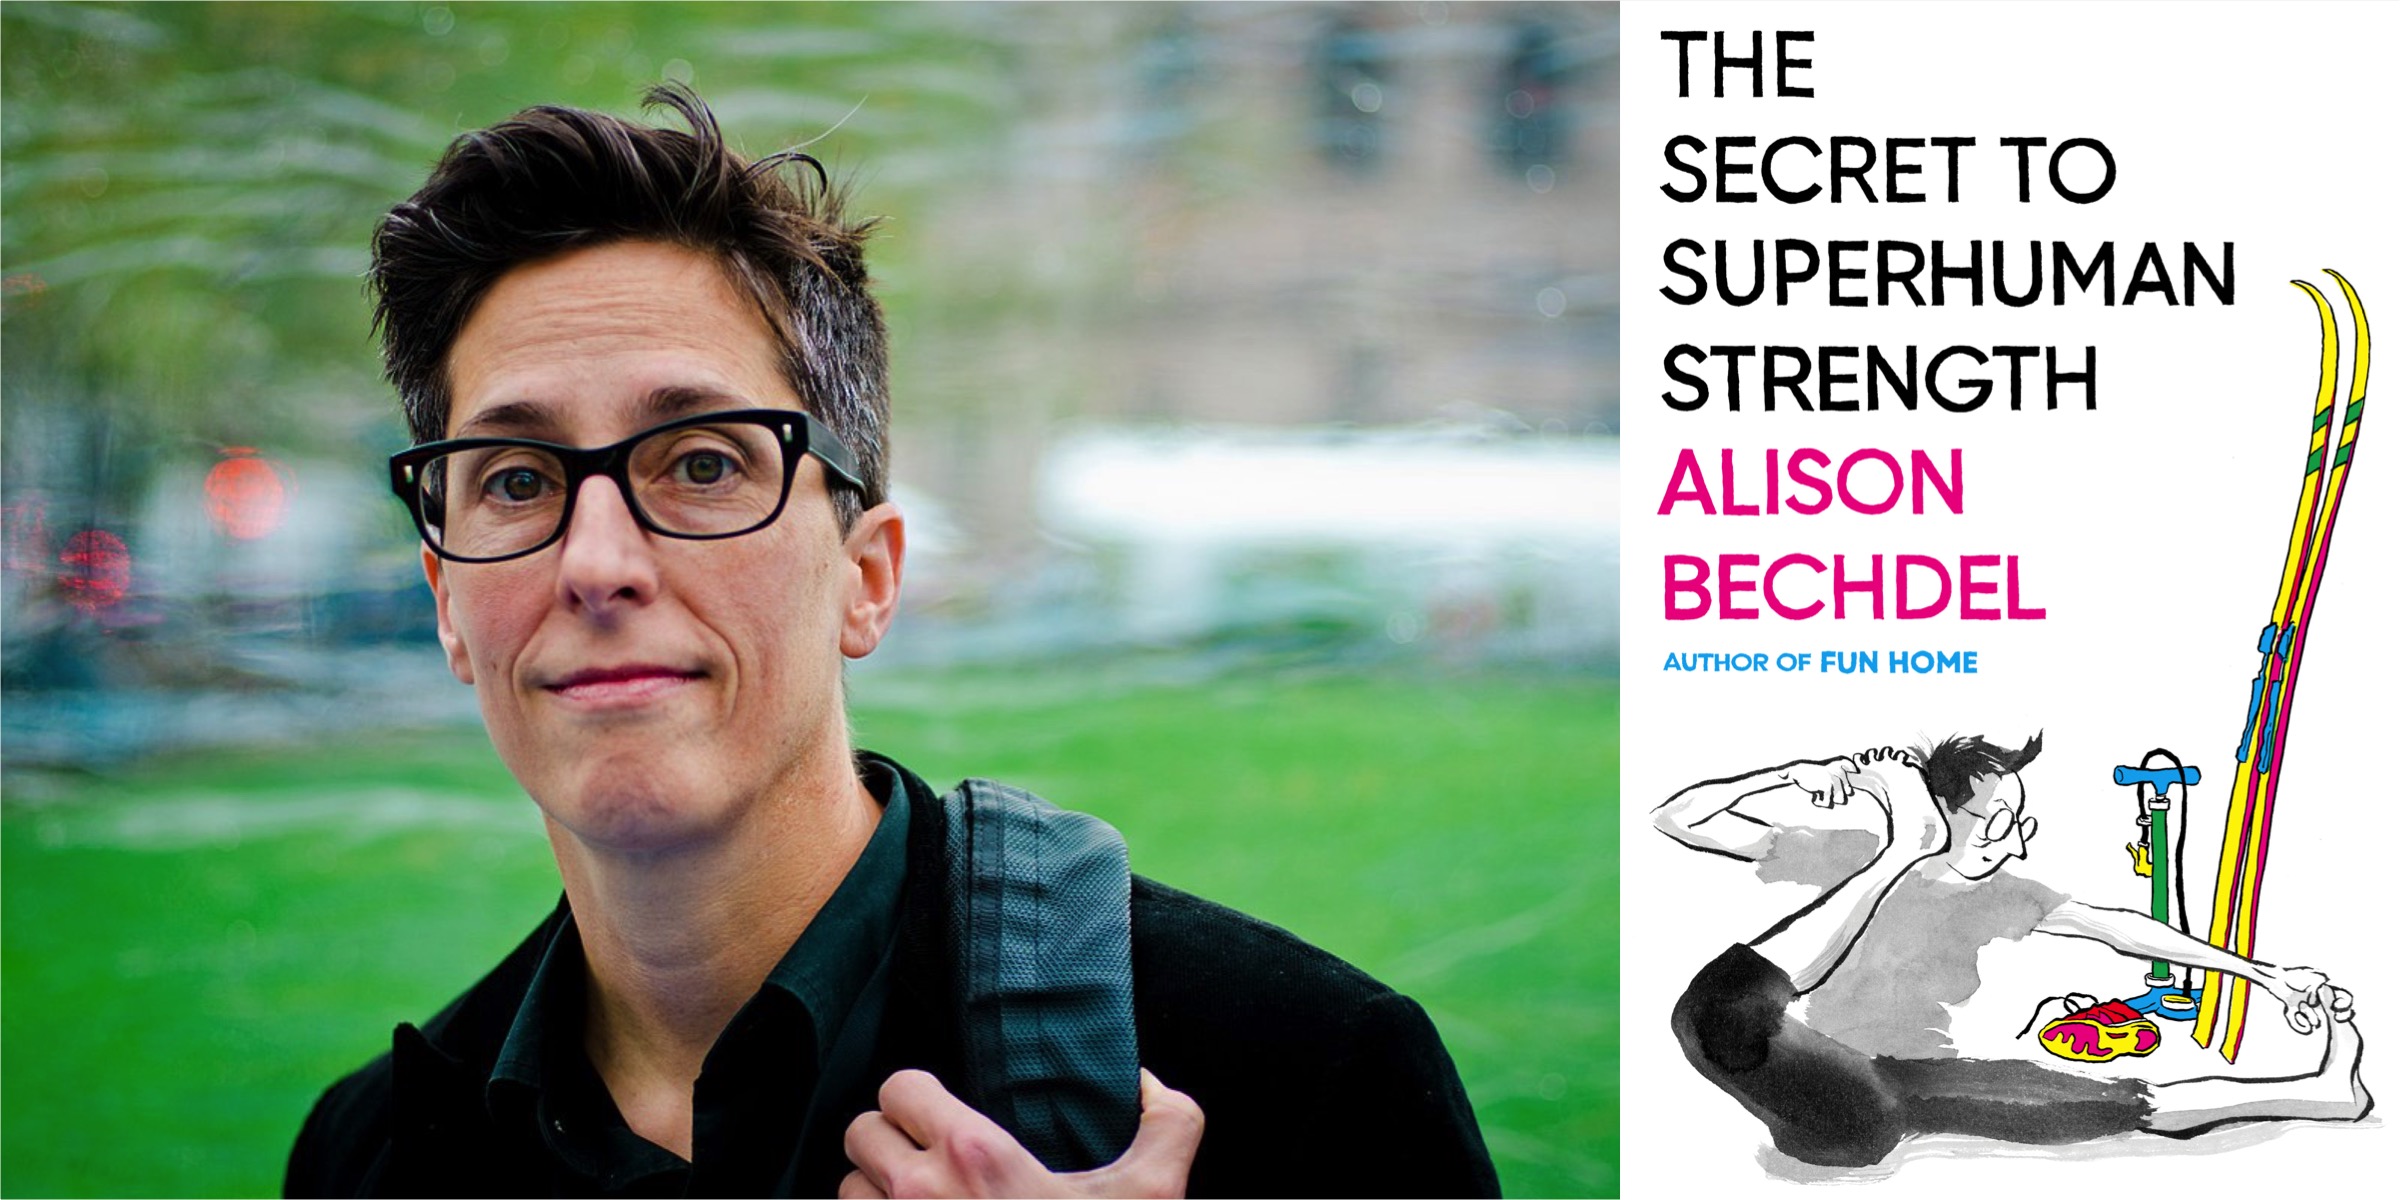 A composite photo of a portrait of author Alison Bechdel and the cover of her new book, The Secret to Superhuman Strength